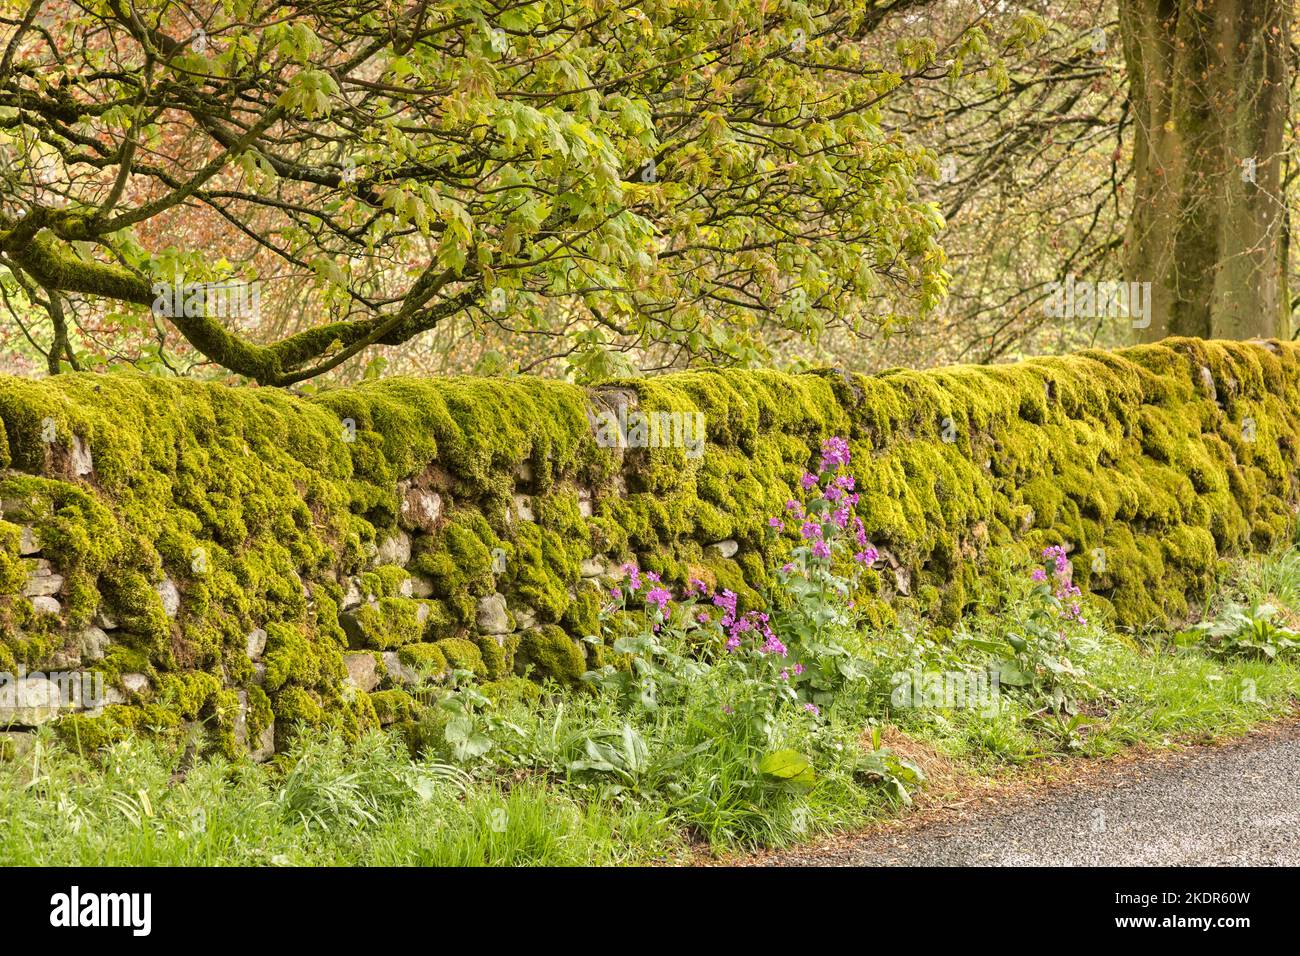 An example of a grass verge in the countryside near Hebden in the Yorkshire Dales, with wild flowers blooming and a moss covered dry stone wall. Stock Photo